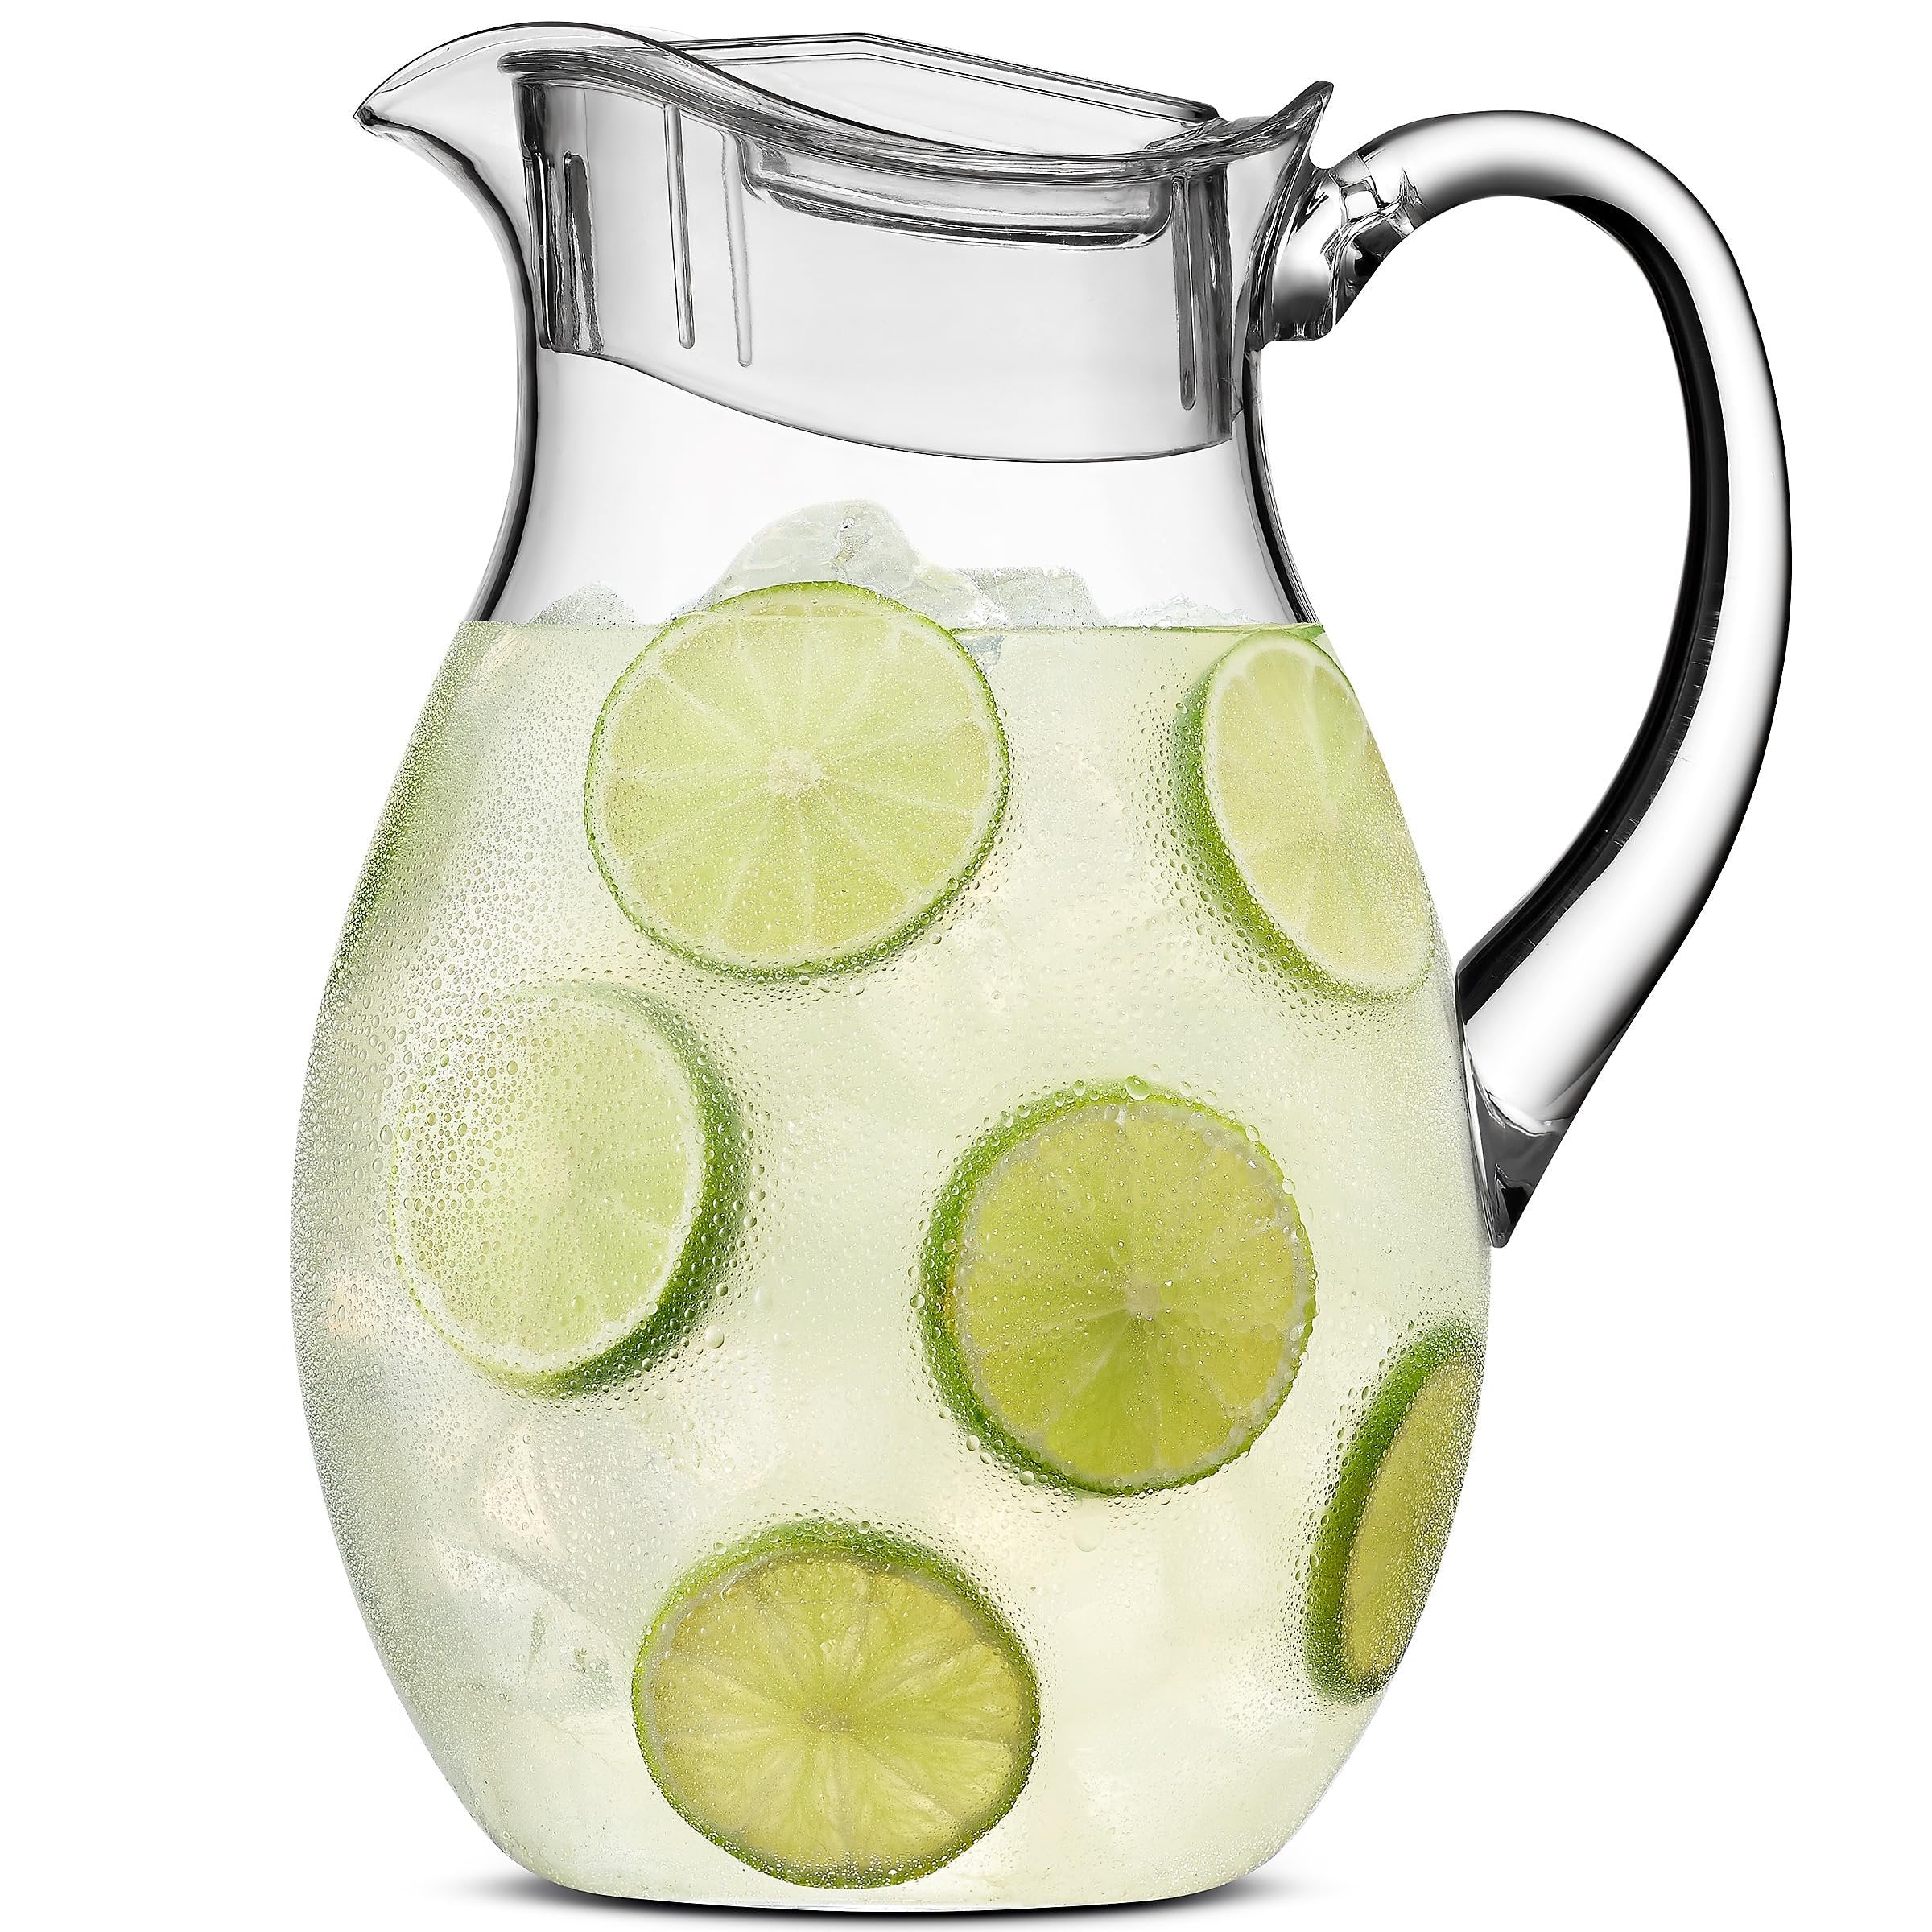 MosJos Acrylic Pitcher (72 oz), Clear Plastic, Water Pitcher with Lid, Shatterproof, BPA-Free Clear Pitcher, Ideal for Sangria, Lemonade, Juice, Iced Tea & More (Clear)